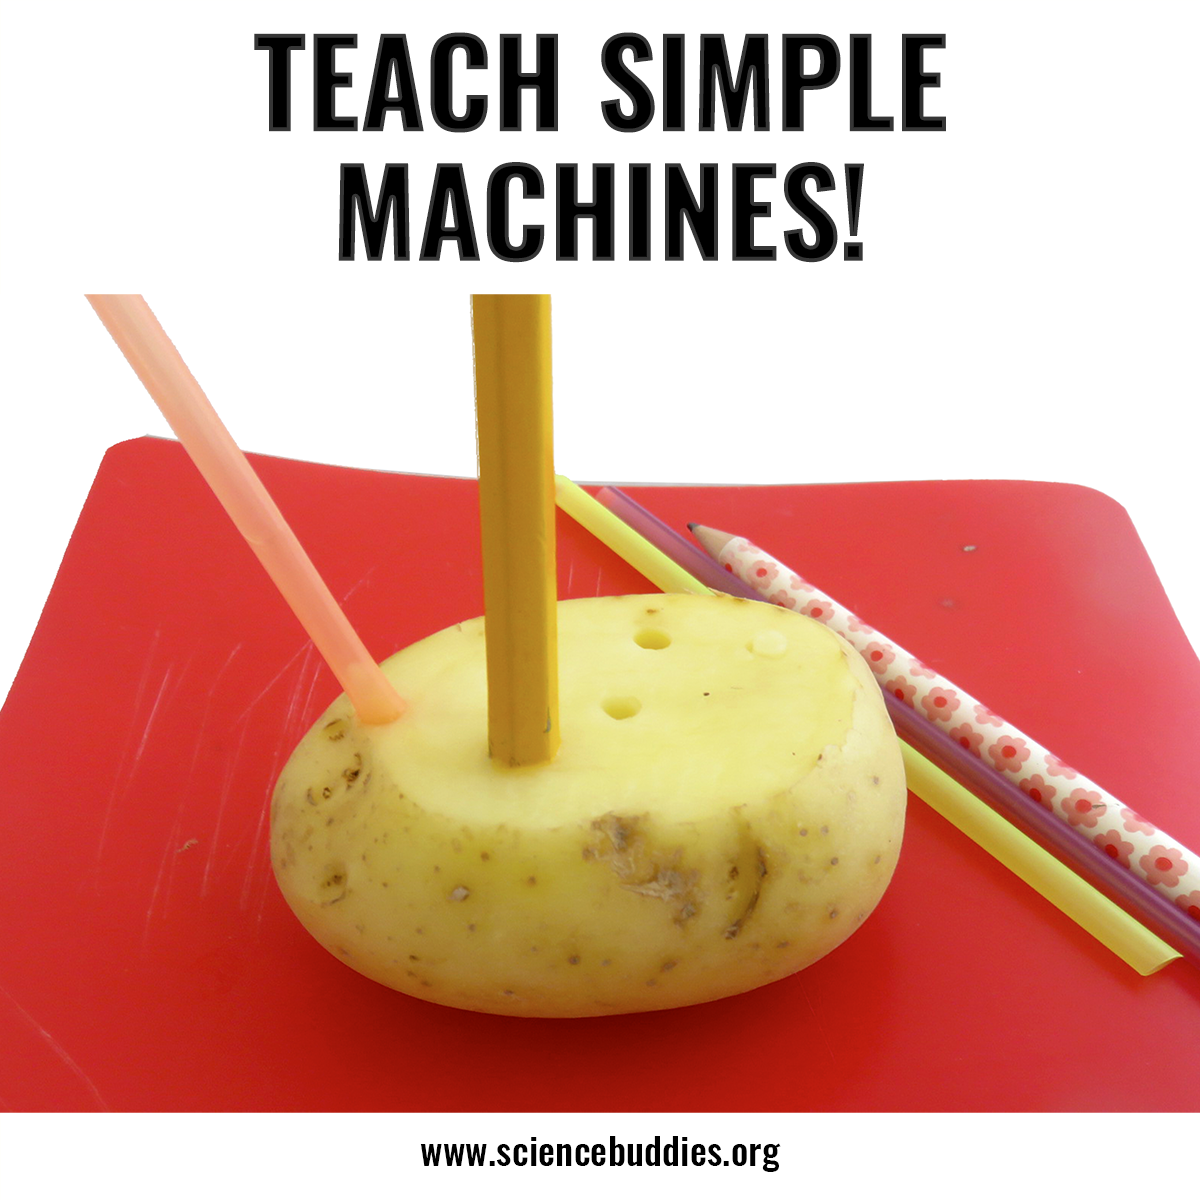 A potato holes experiment - part of Simple Machines Collection at Science Buddies